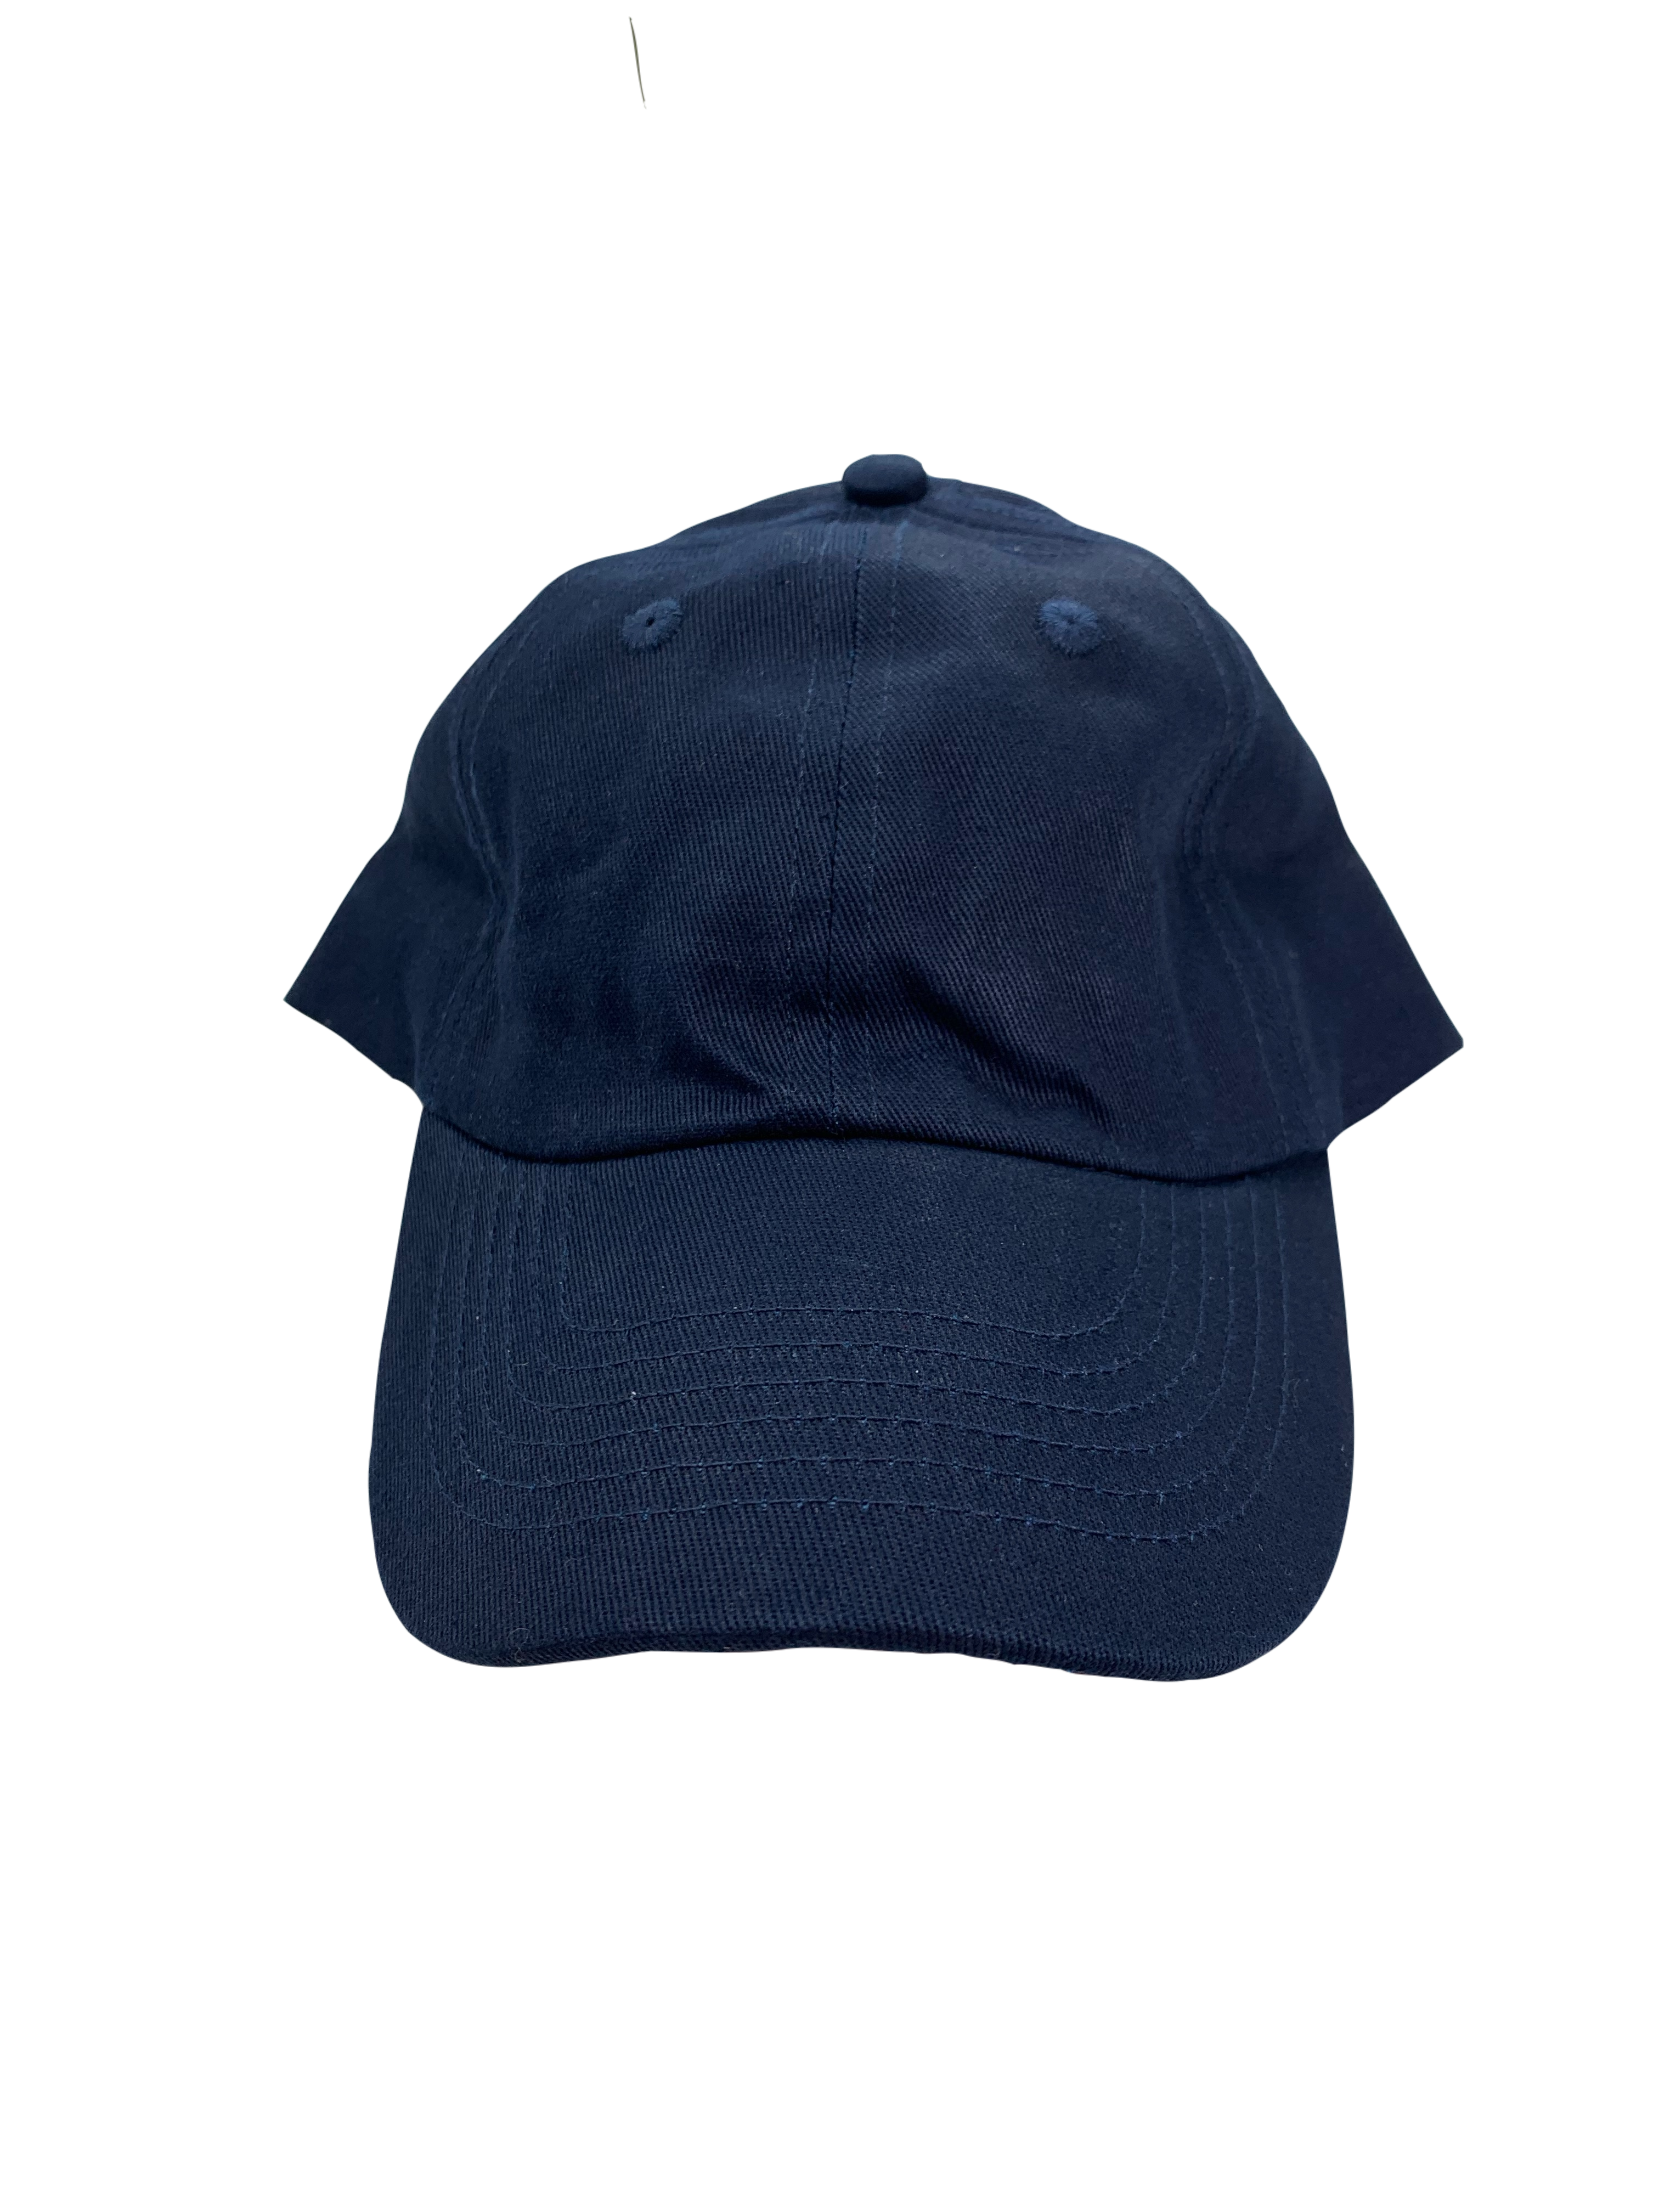 front view of hat solid navy blue